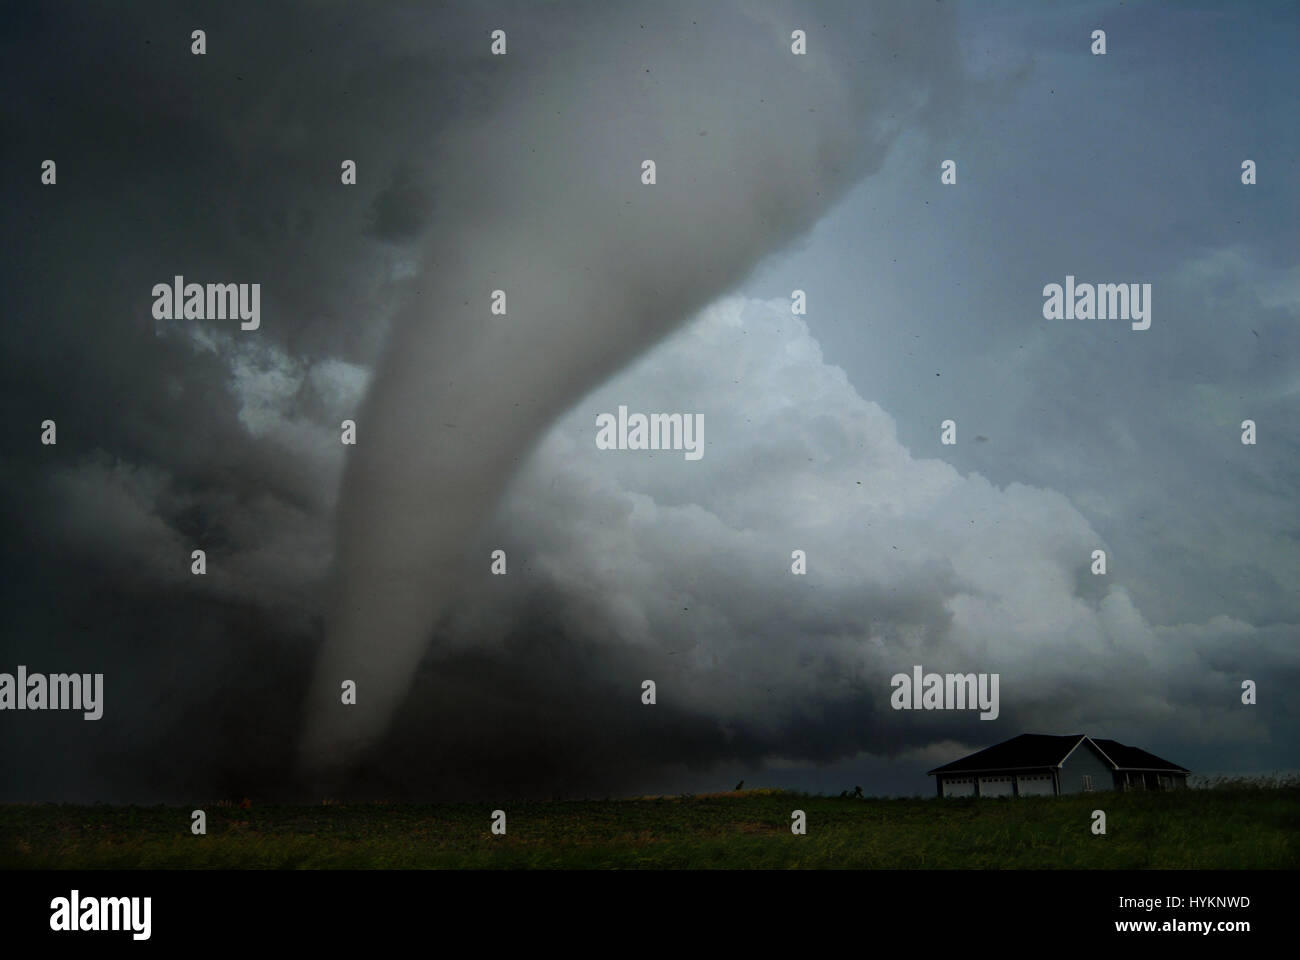 TORNADO ALLEY, USA: Pleasanton tornado appraoching a house. THE DEADLIEST weather events have been captured on camera by one lightning quick photographer. Incredible photographs show extreme weather from America’s Tornado Alley, renowned for the frequency of its storms. From terrifying lightning bolts to all-encompassing tornados, these pictures manage to capture to ferocity and atmosphere of these natural phenomena. Stock Photo